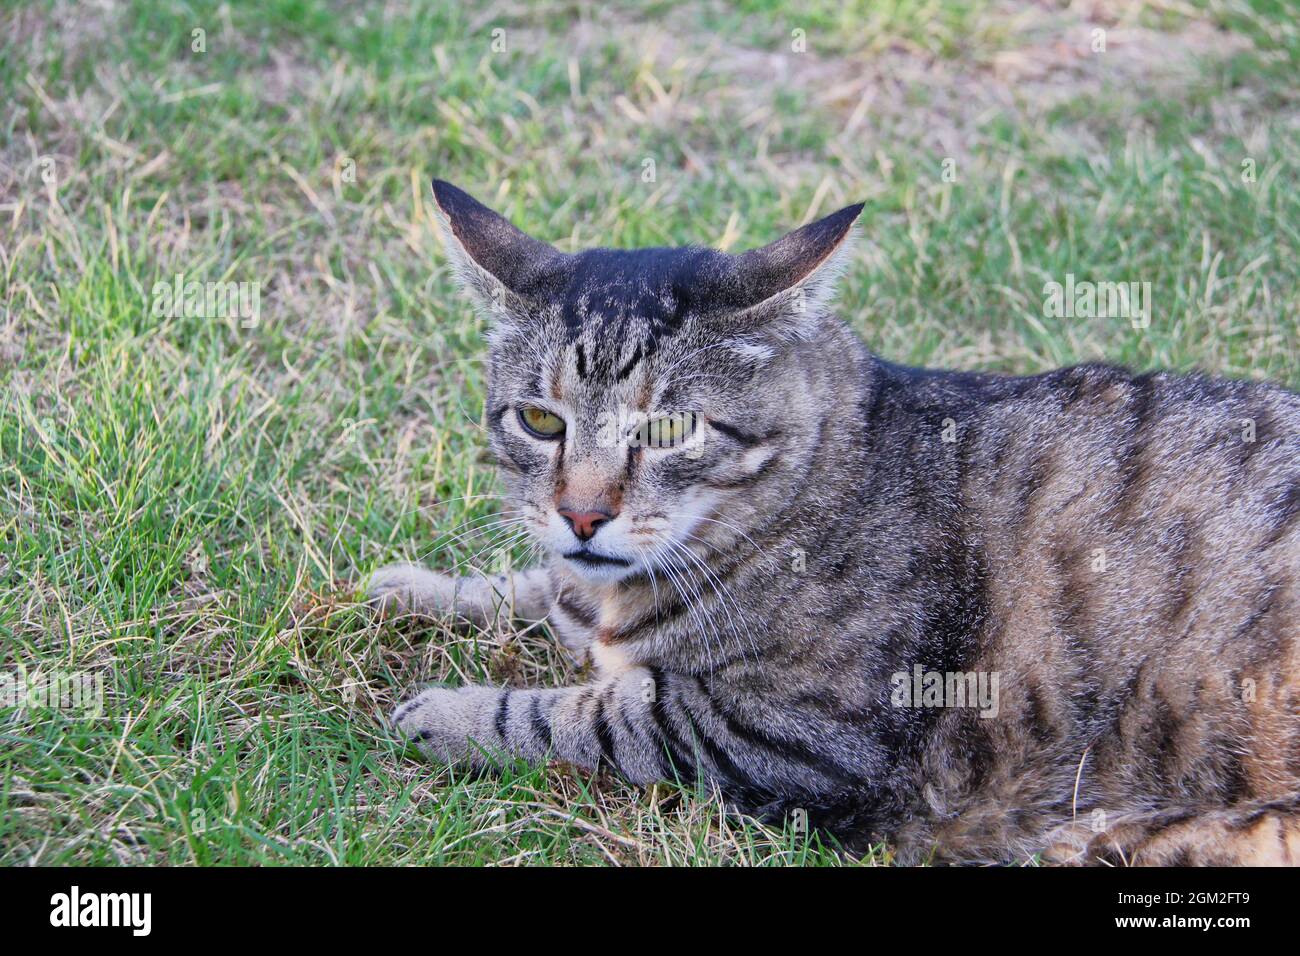 Adult Tabby Cat with slightly bewildered expression lying down on grass Stock Photo